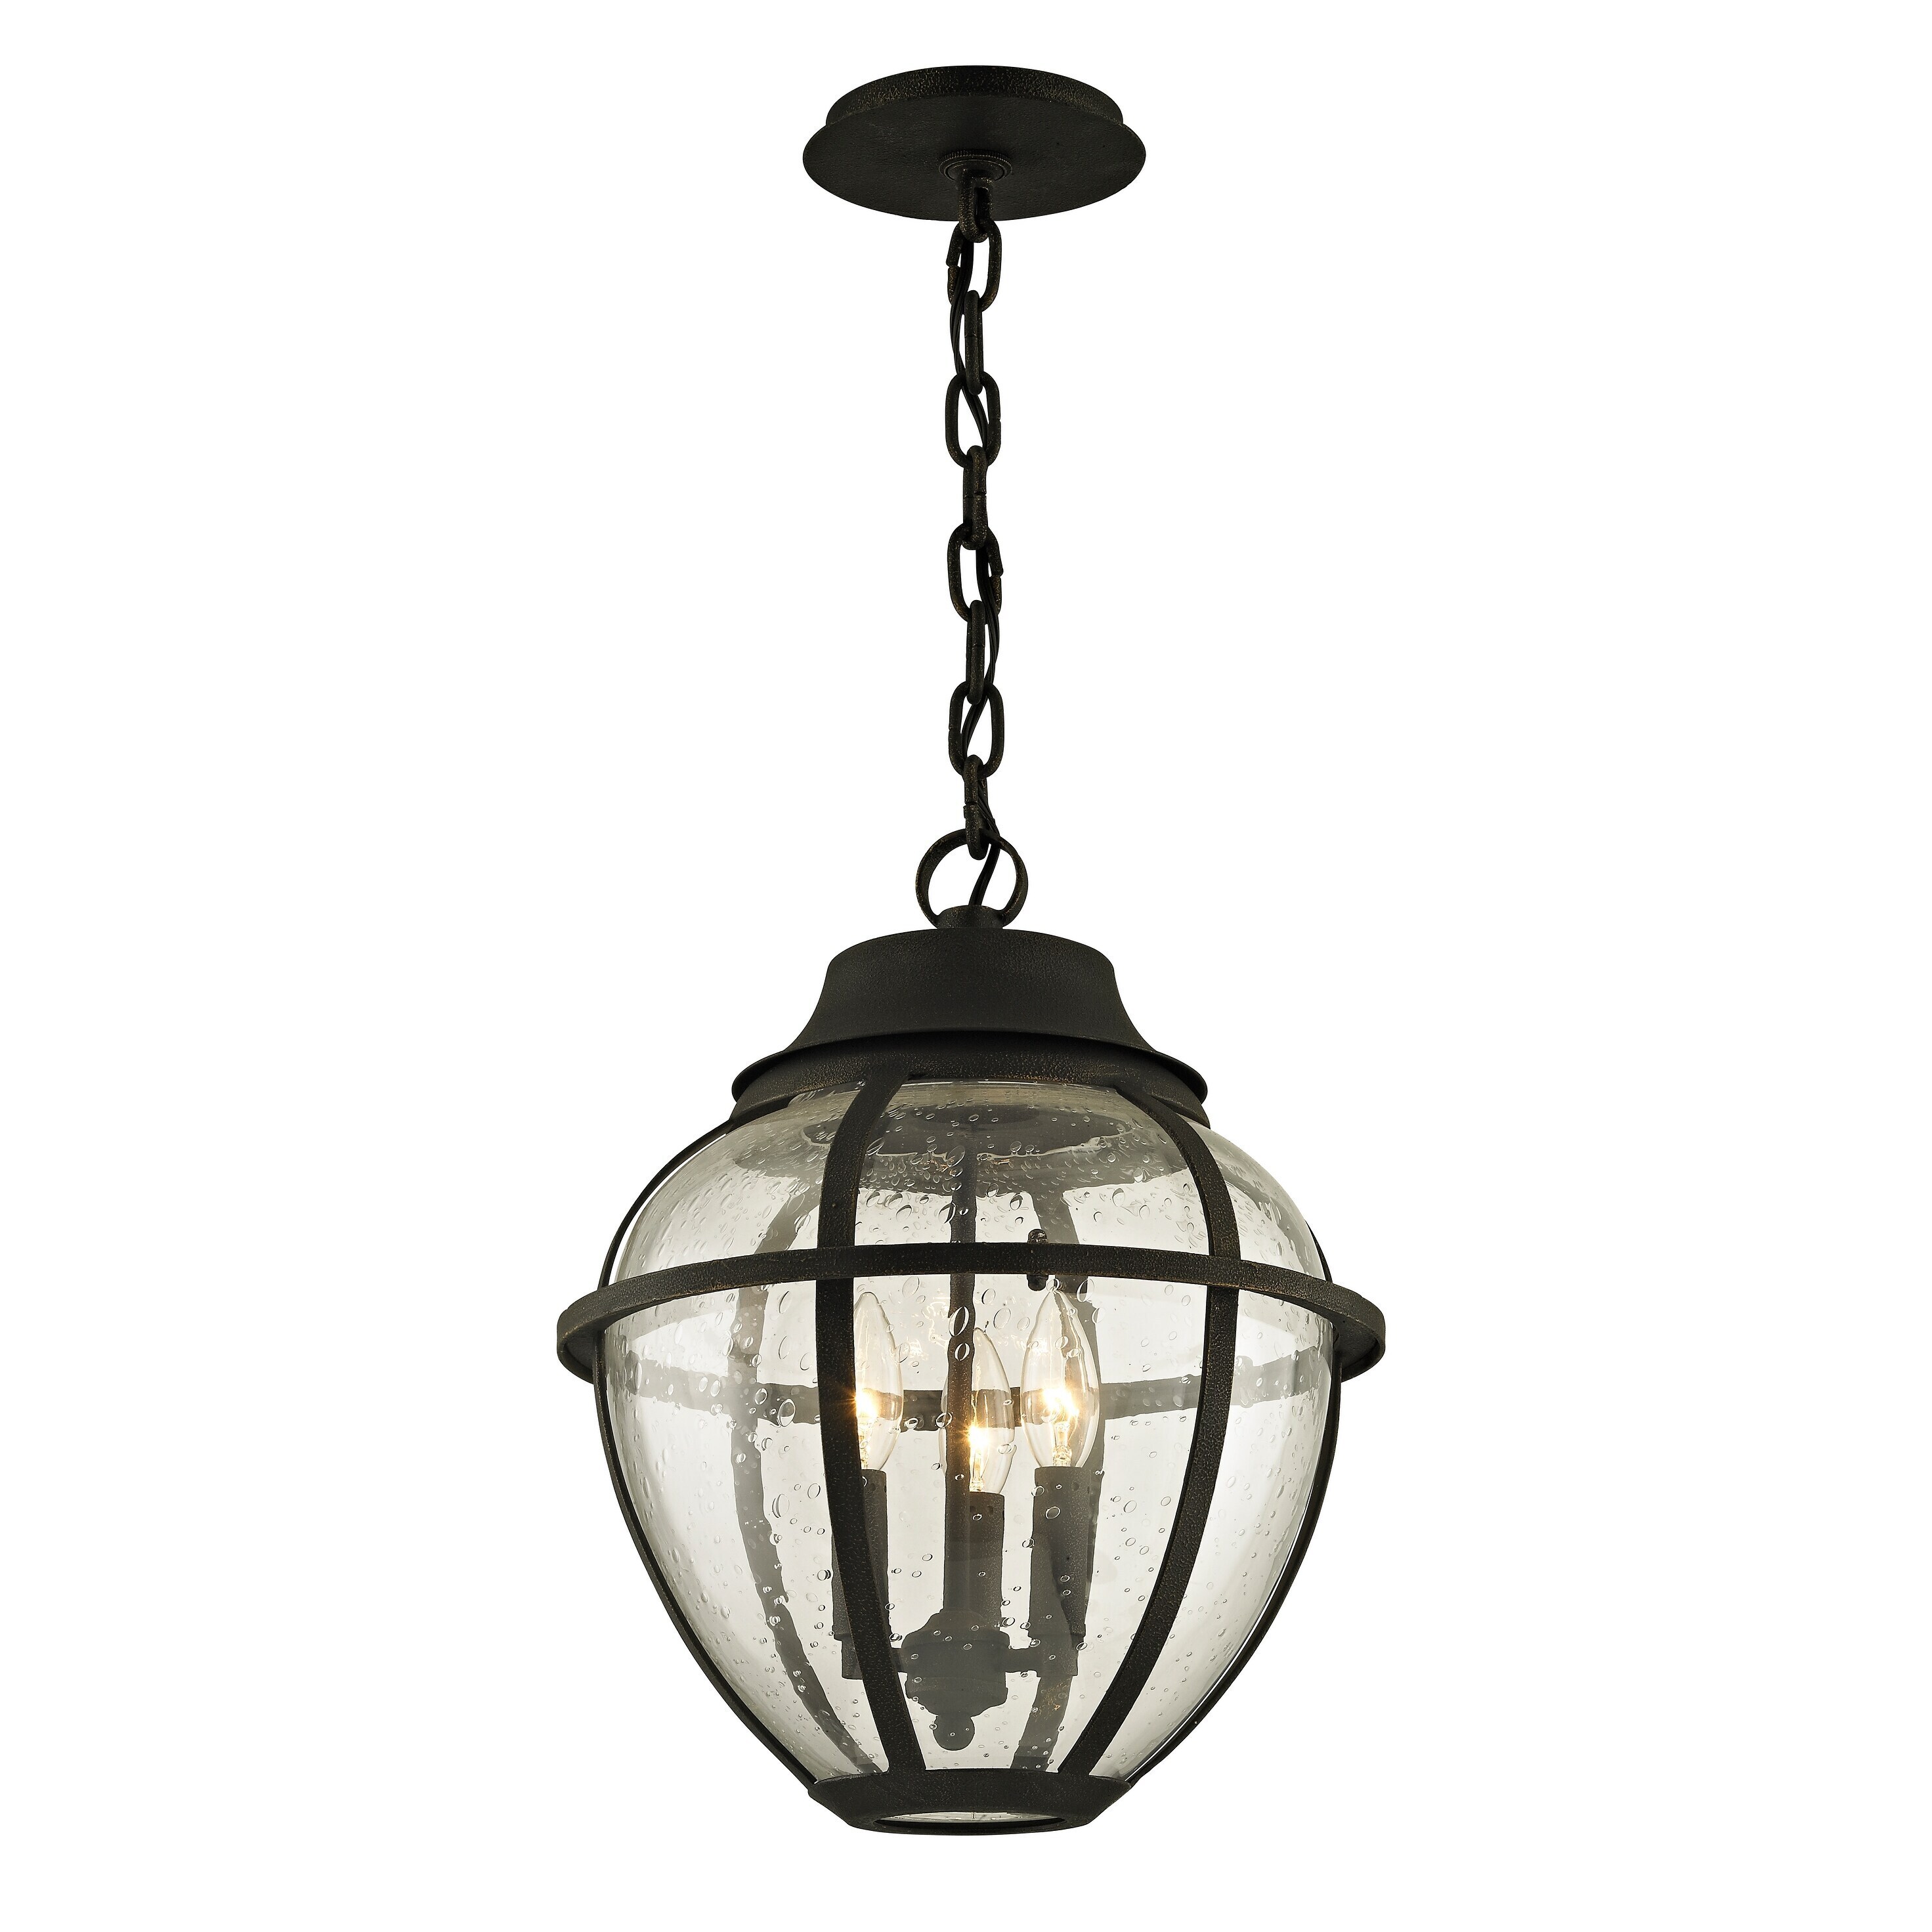 Vintage extra large outdoor pendant lighting in creative shapes